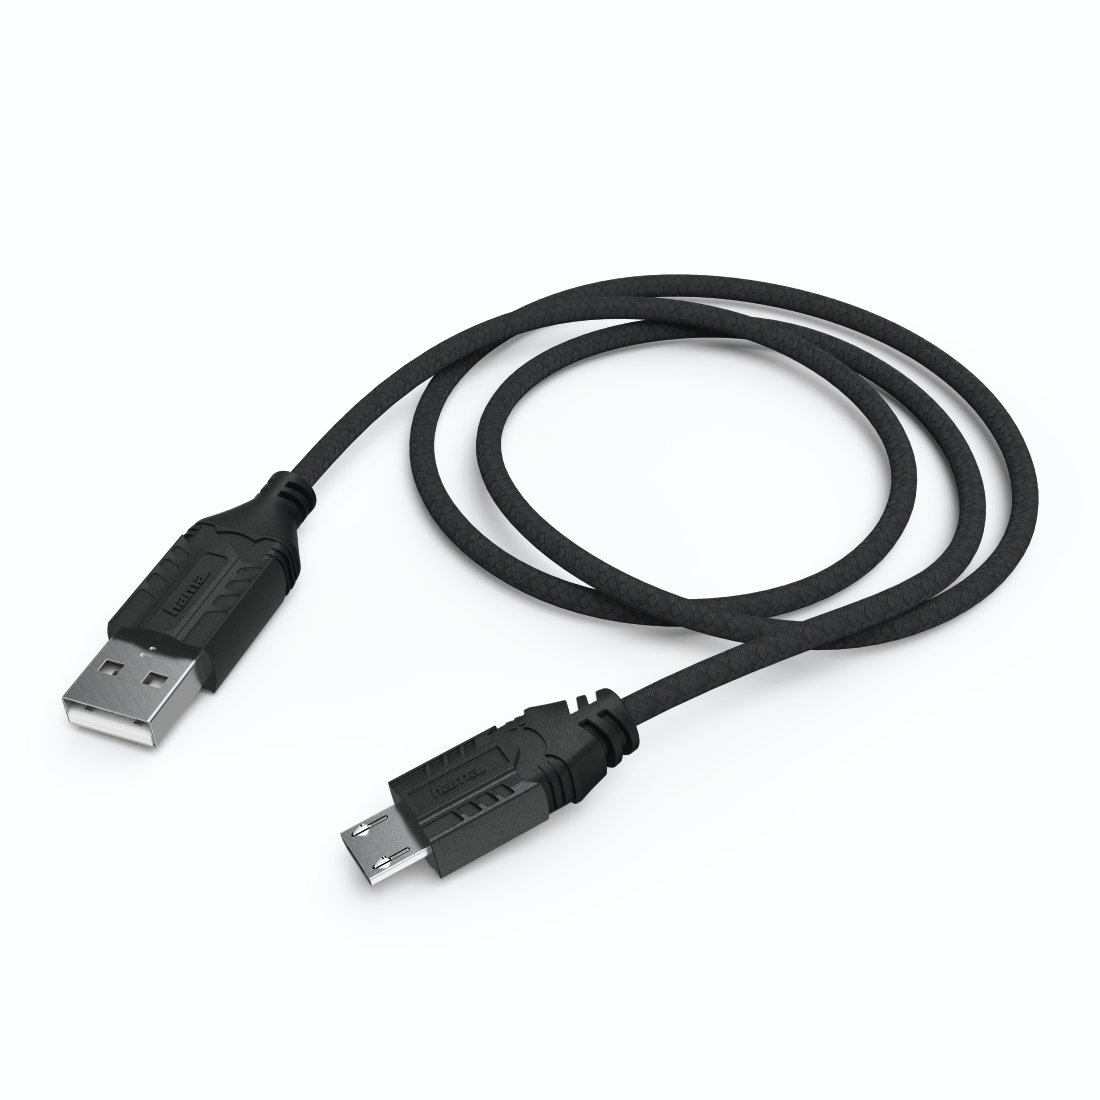 00054472 Hama “Basic” Controller Charging Cable for PS4, 1.5 m | hama.com